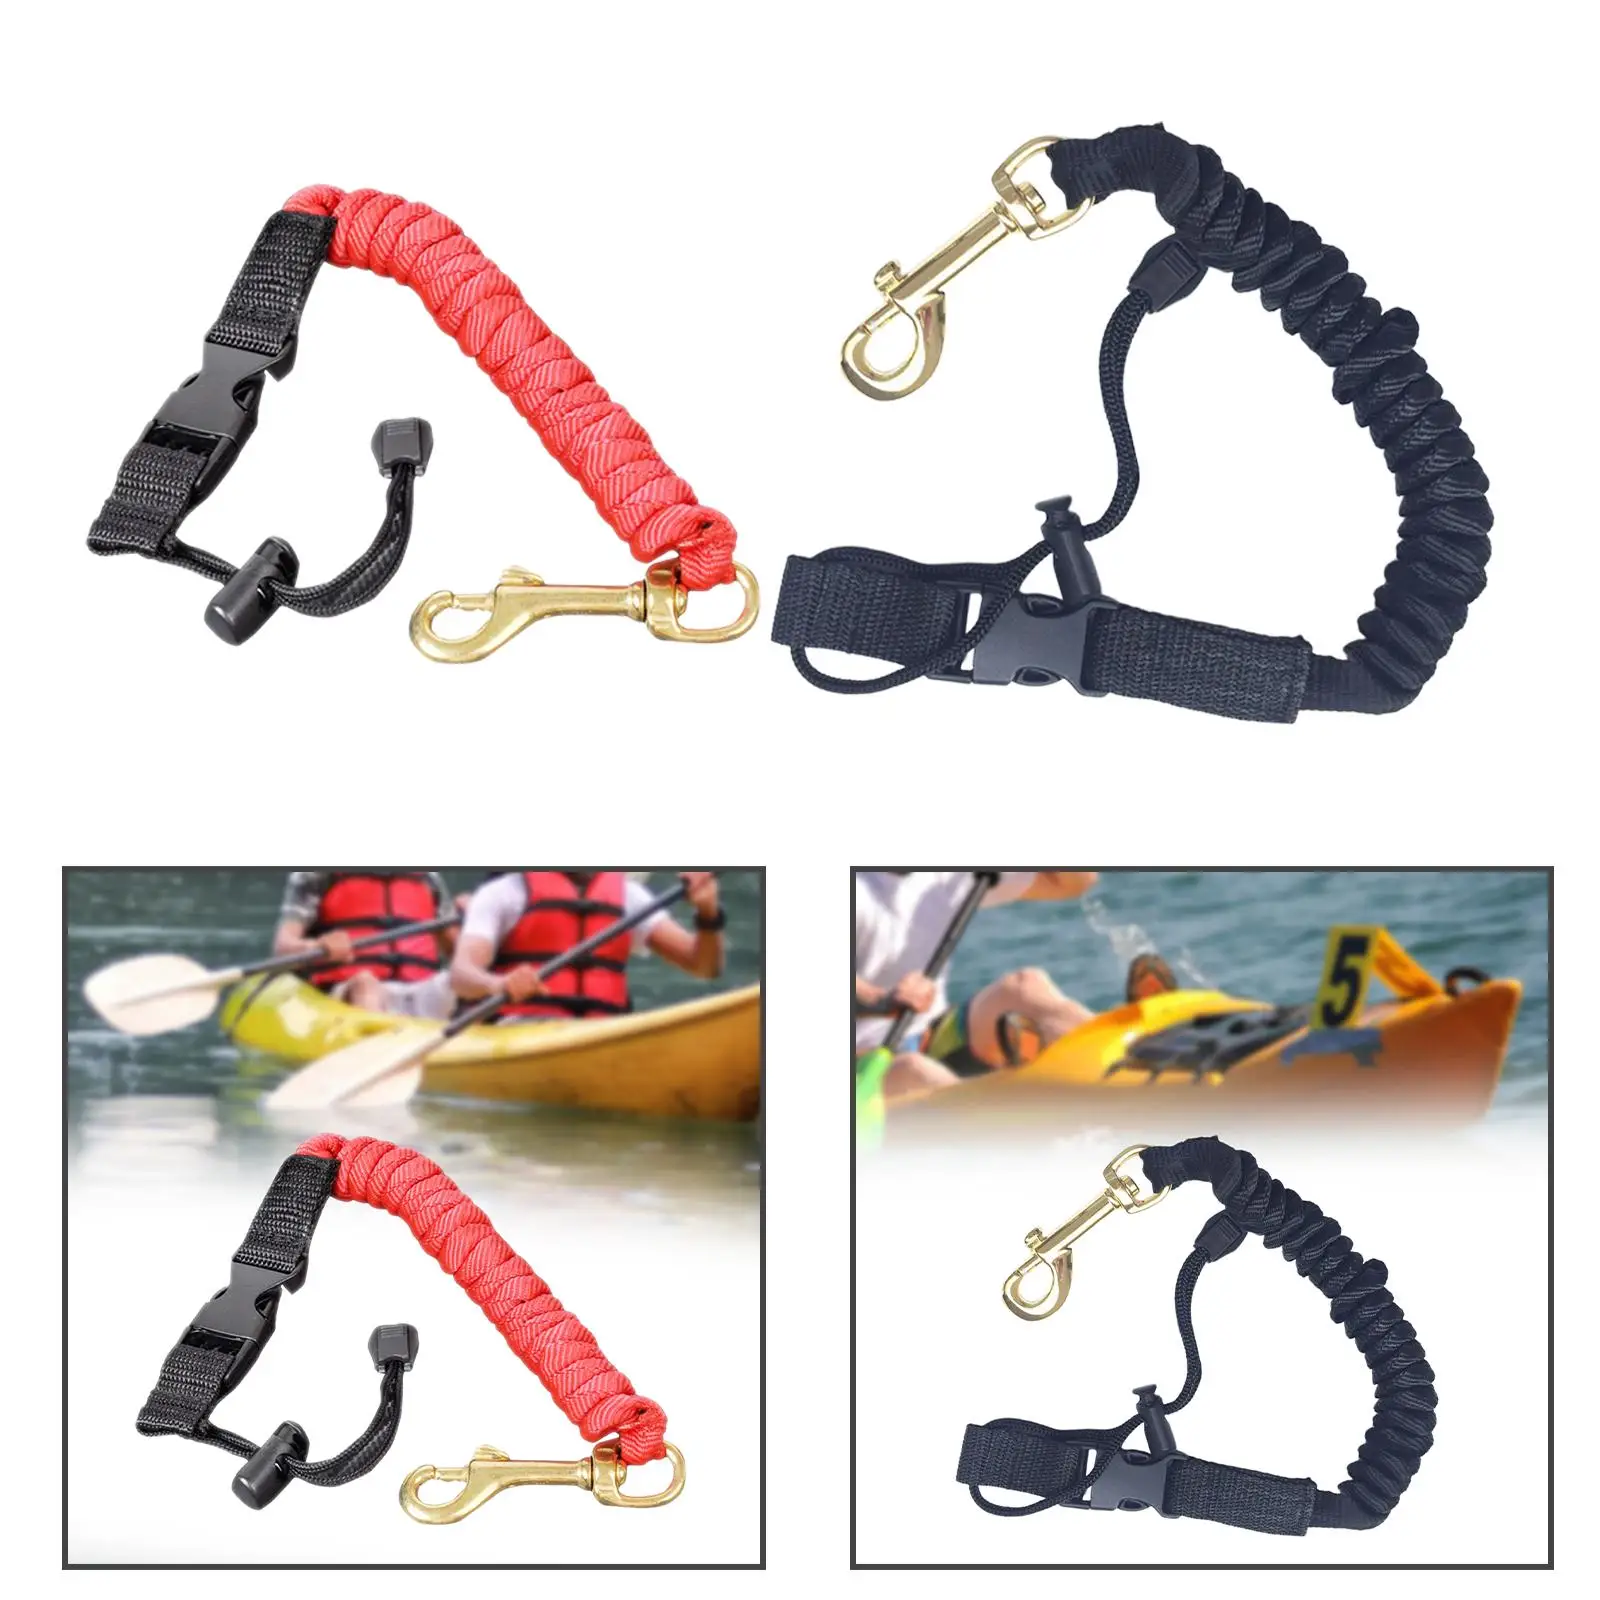 Kayak Paddle Tether Leash Bungee Cord Strap Canoeing Sail Gear Paddle Holder